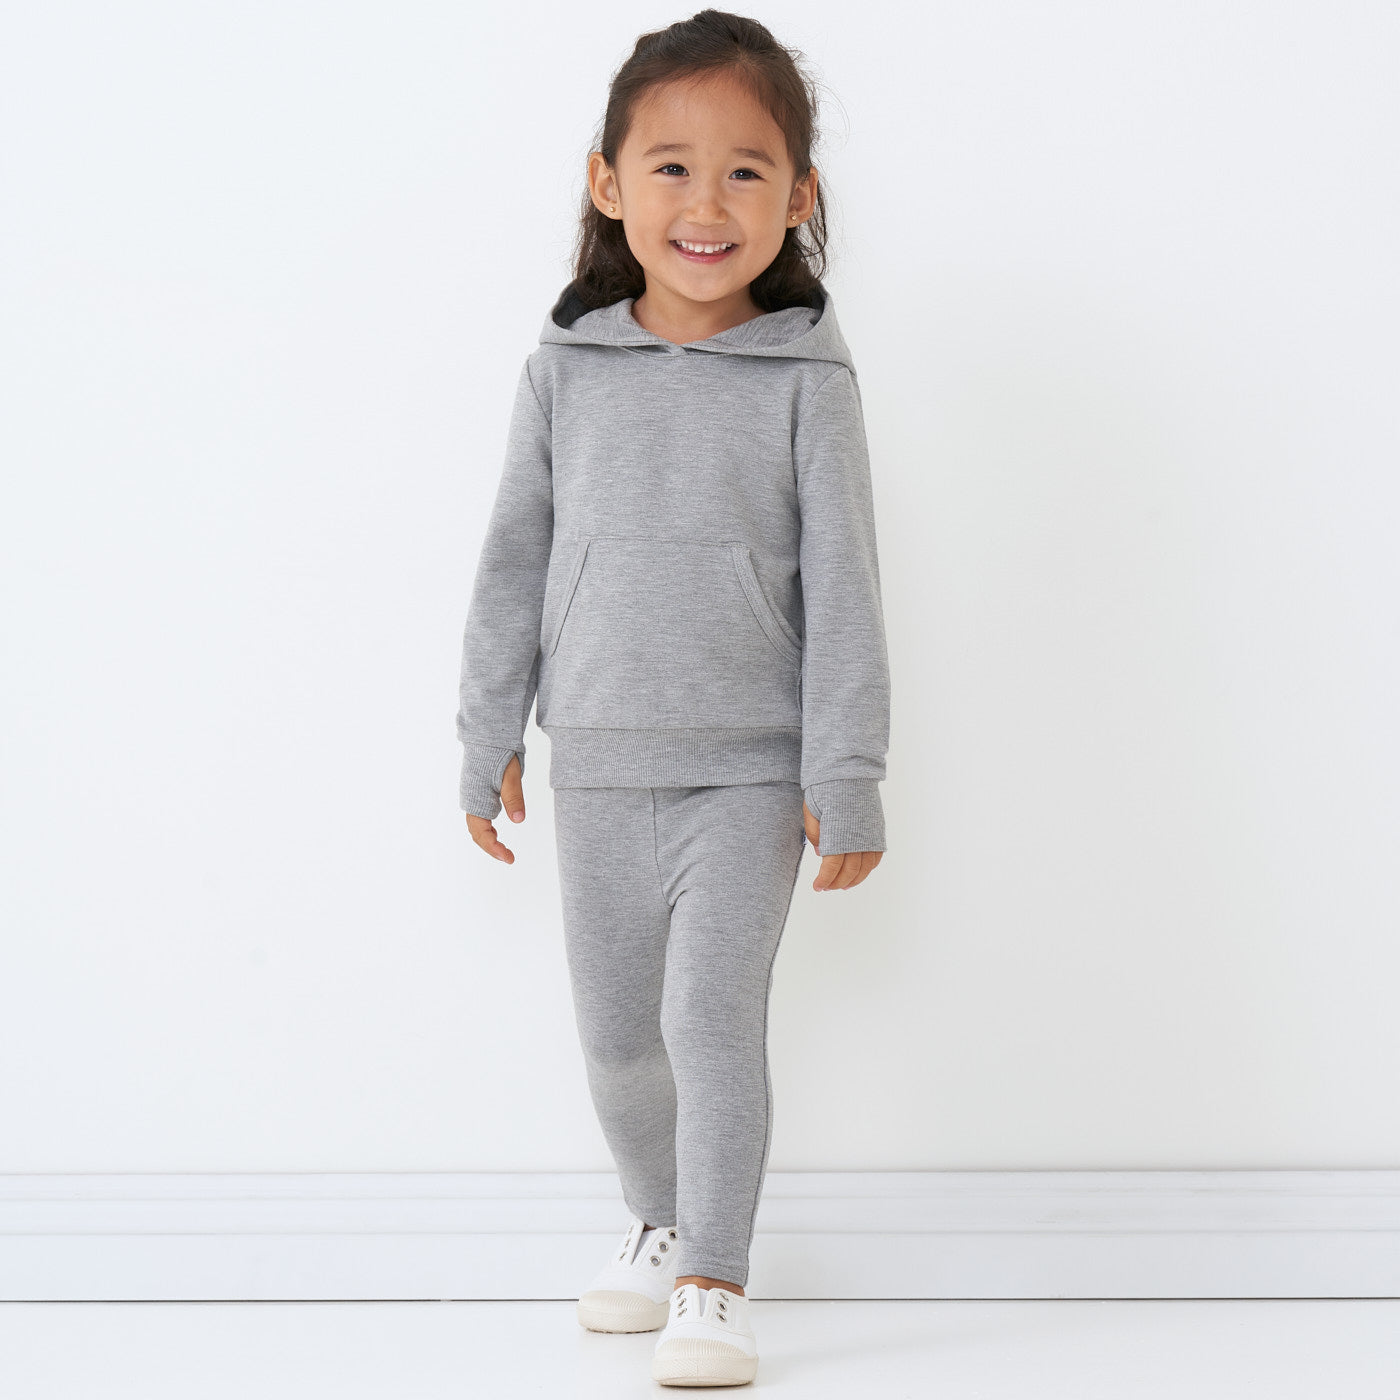 Alternate image of a child wearing Heather Gray cozy leggings and matching hoodie